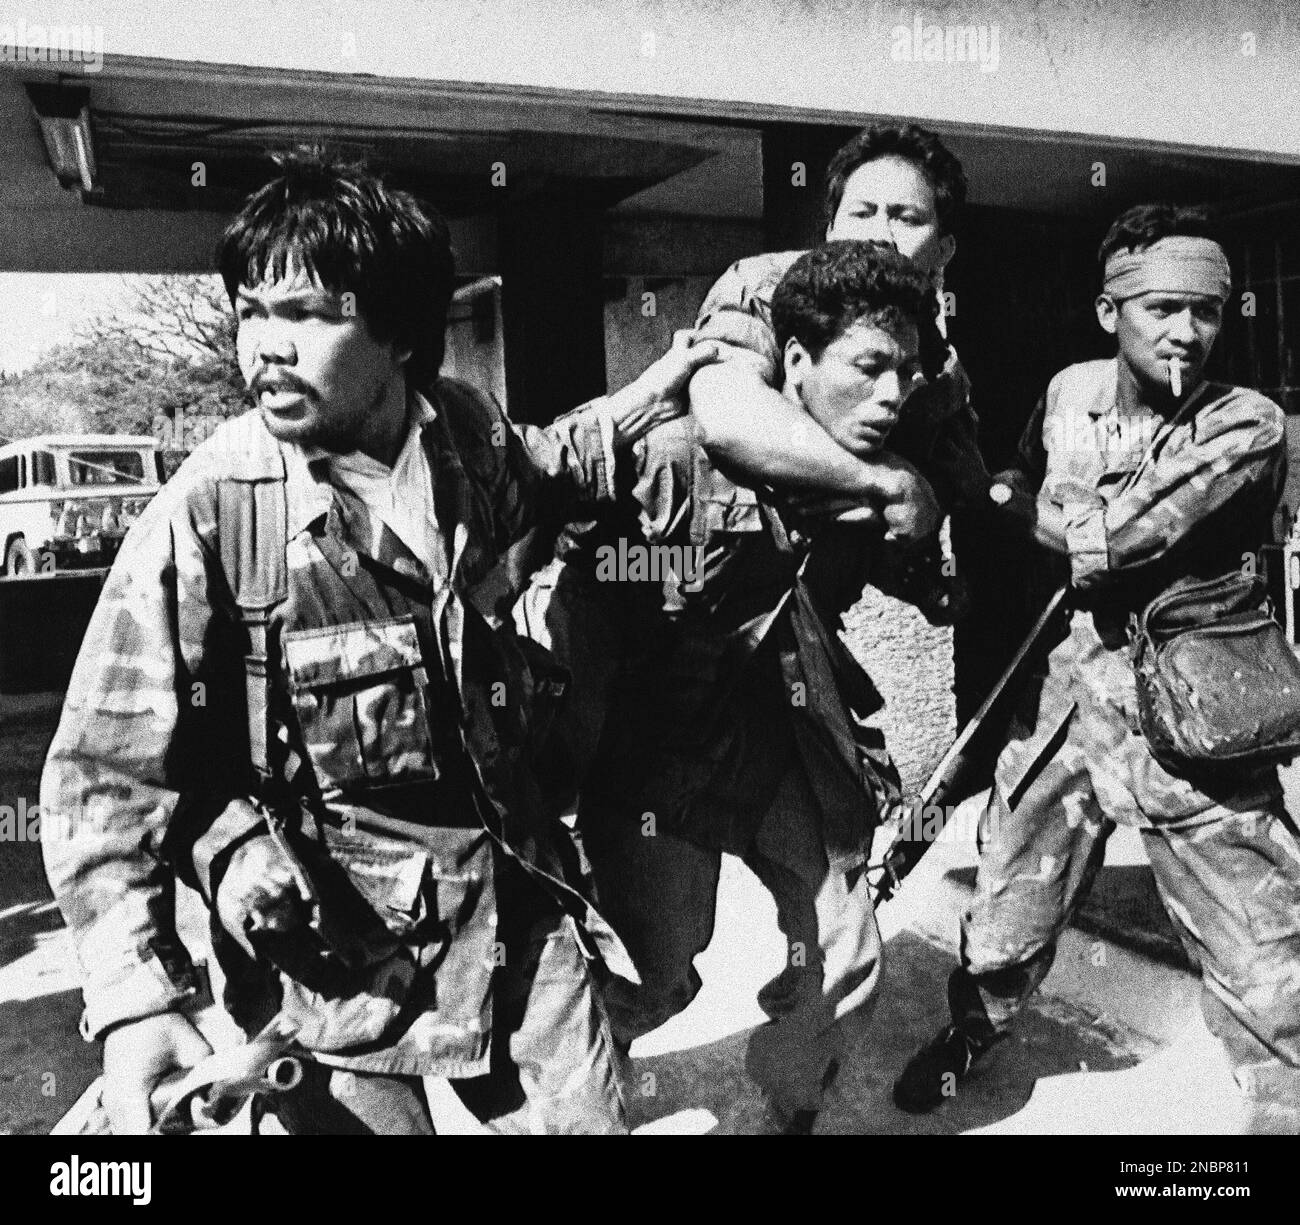 A pro-Marcos soldier is jumped by three rebel soldiers in the takeover ...